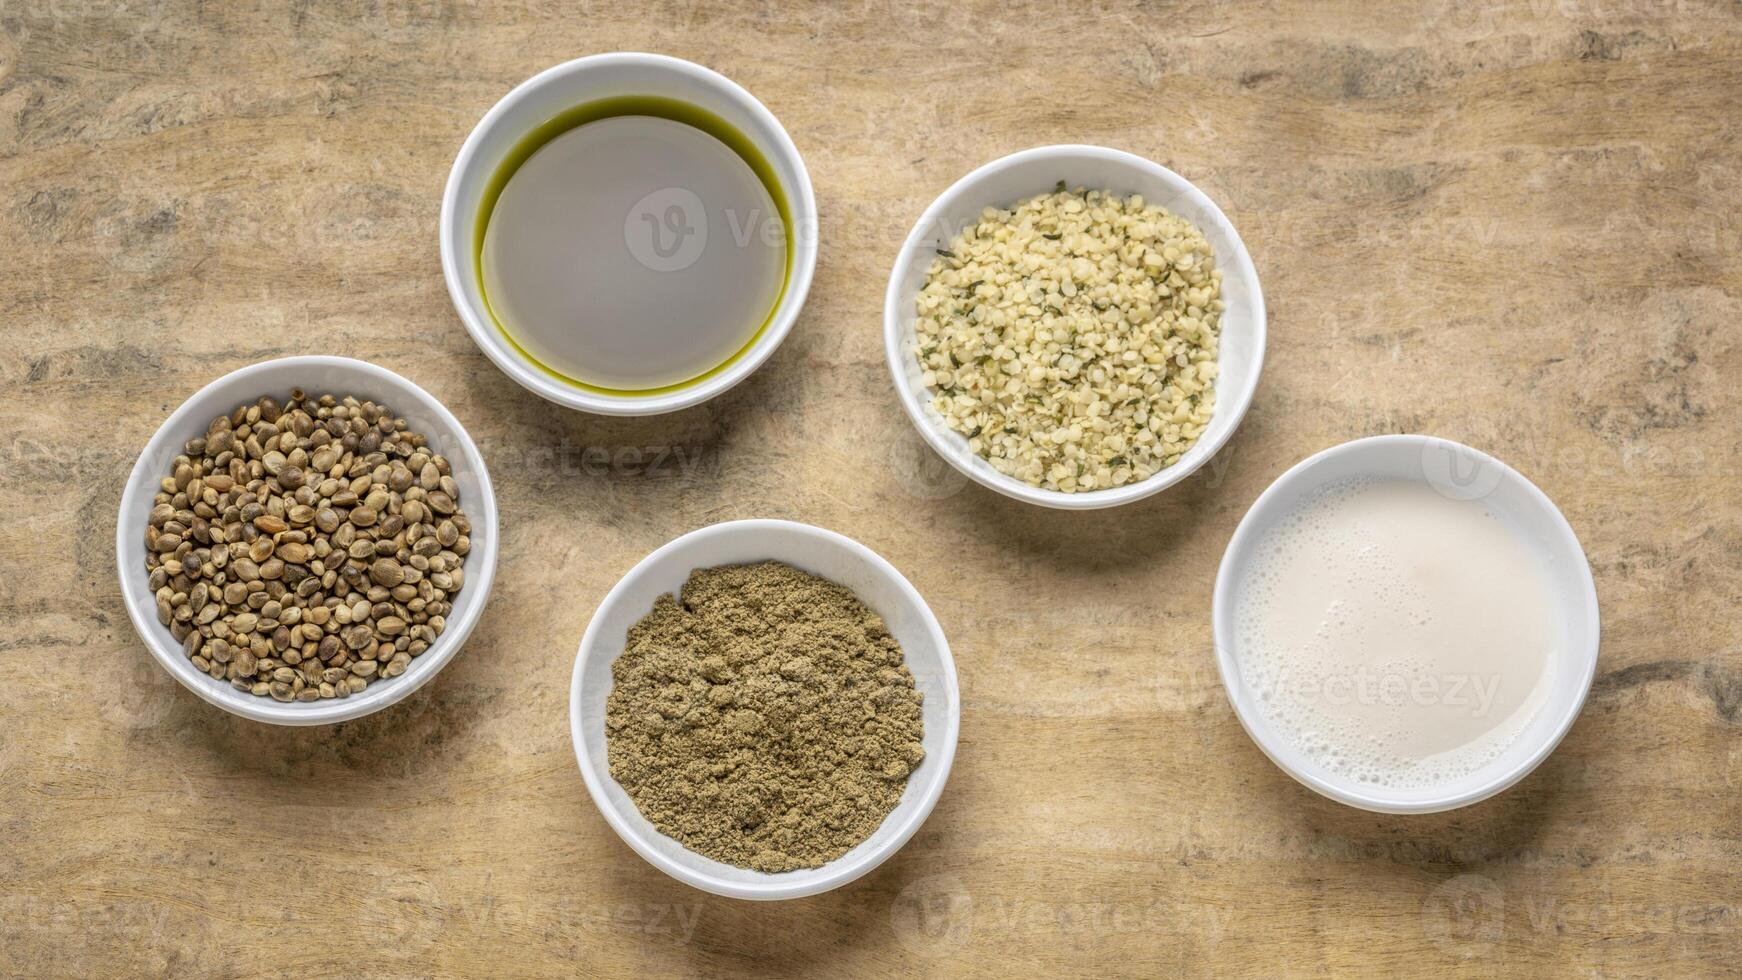 collection of hemp seed products, hearts, protein powder, milk and oil in small white bowls against textured bark paper, superfood concept photo